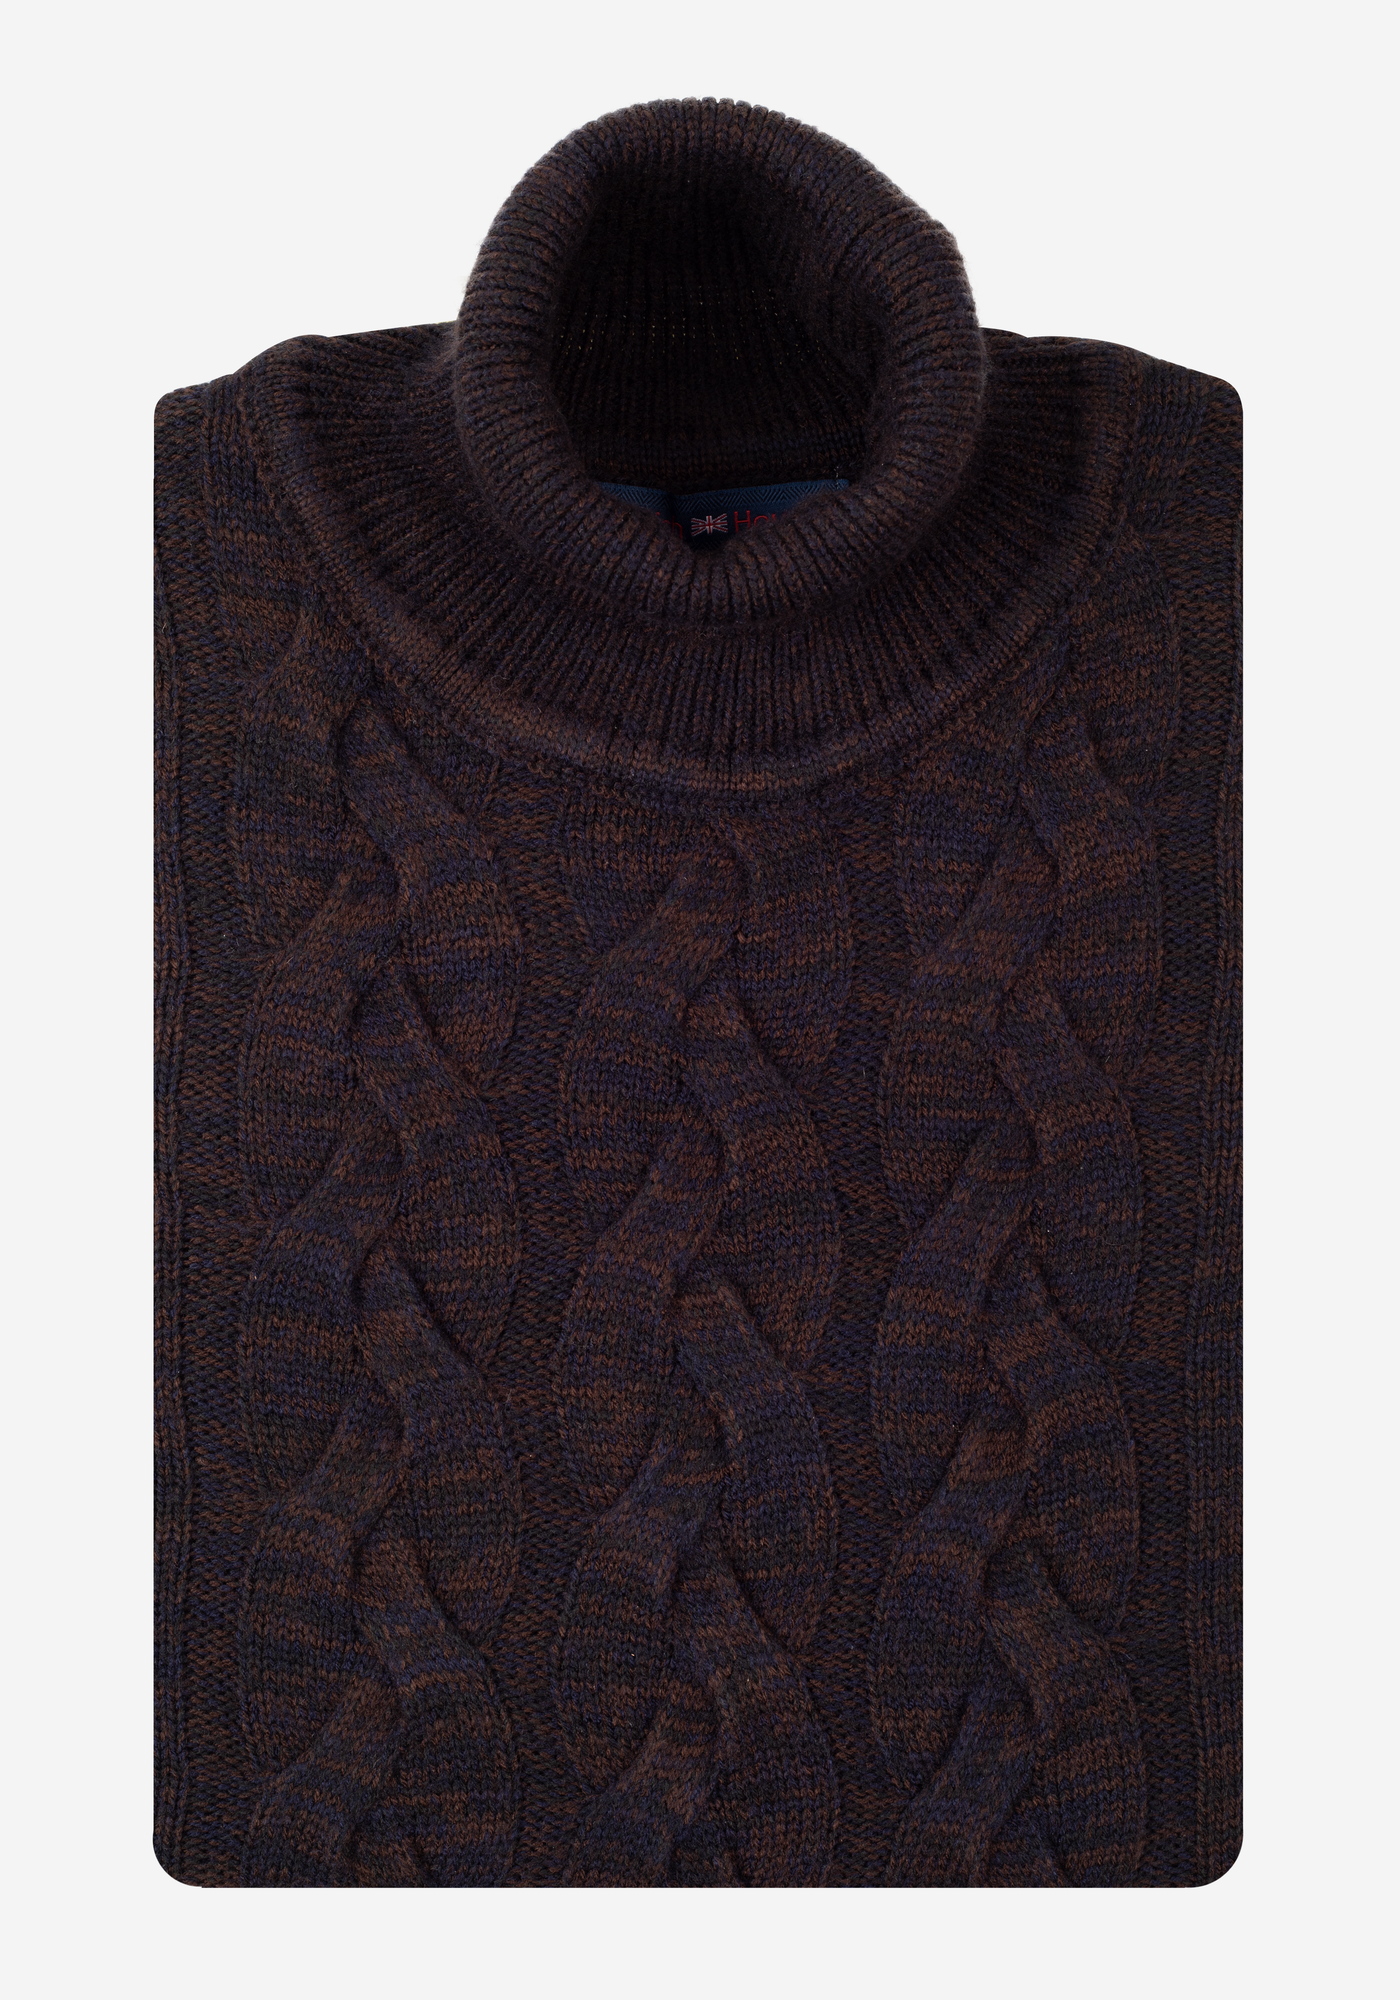 Copper Brown Braided Turtle Neck Pullover